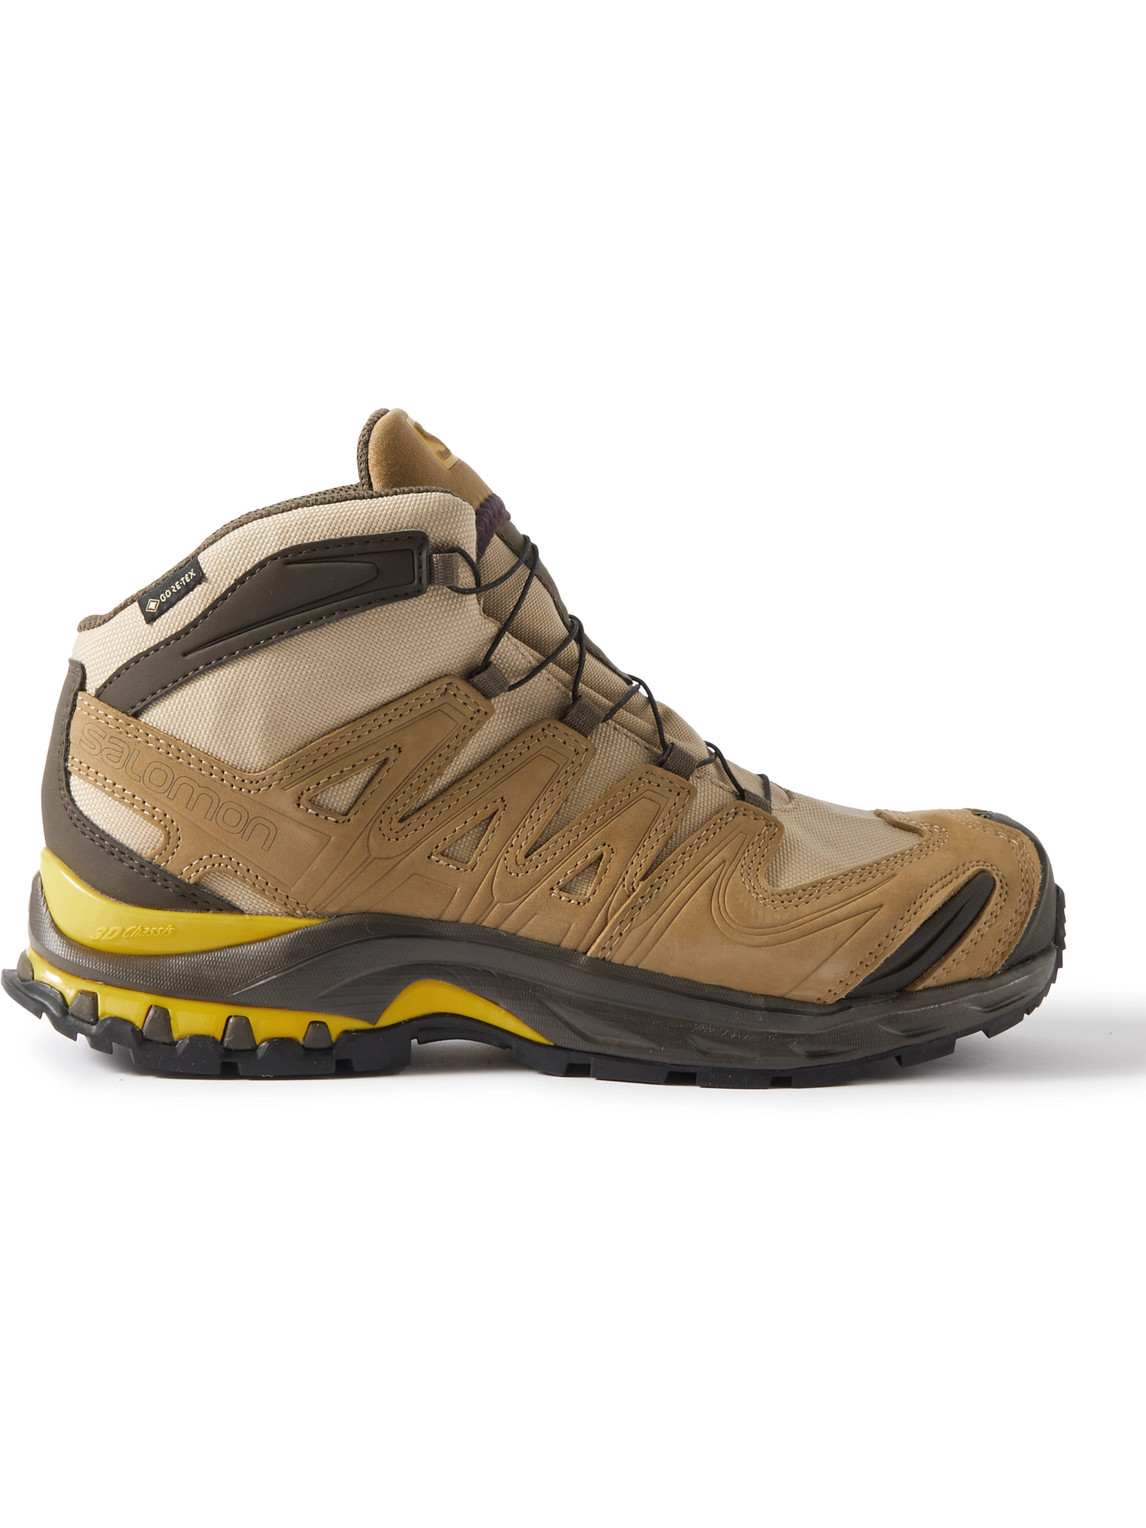 Salomon Better Gift Shop Xa Pro 3d Gore-tex®, Leather And Rubber Sneakers  In Brown | ModeSens